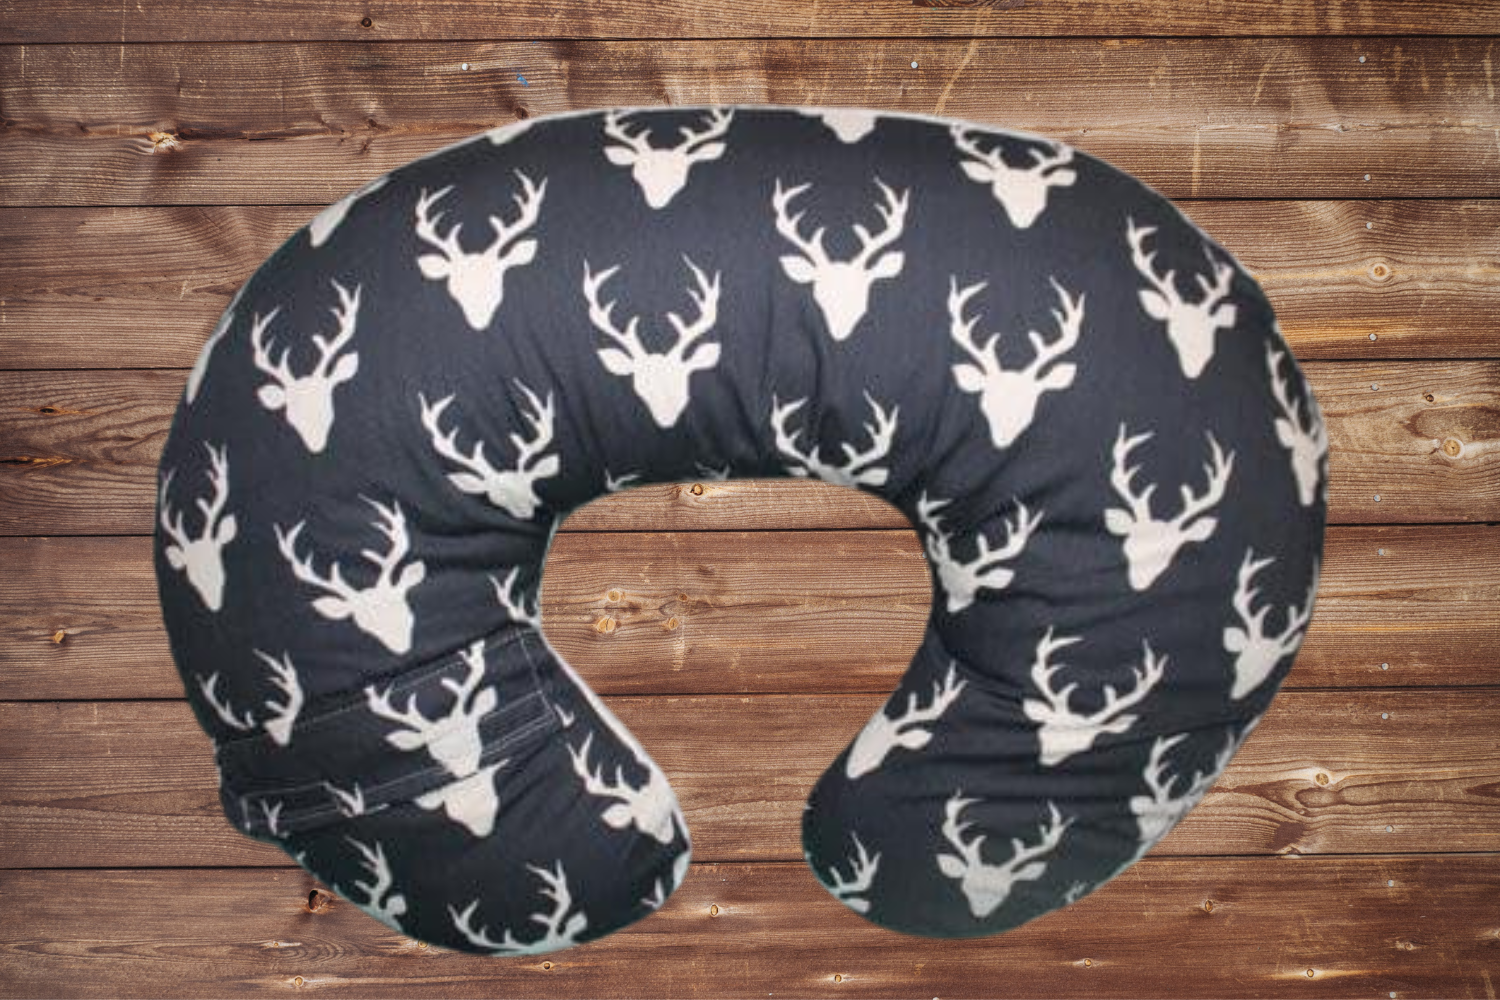 Nursing Pillow Cover - Navy Buck and Fawn Minky Woodland Cover - DBC Baby Bedding Co 